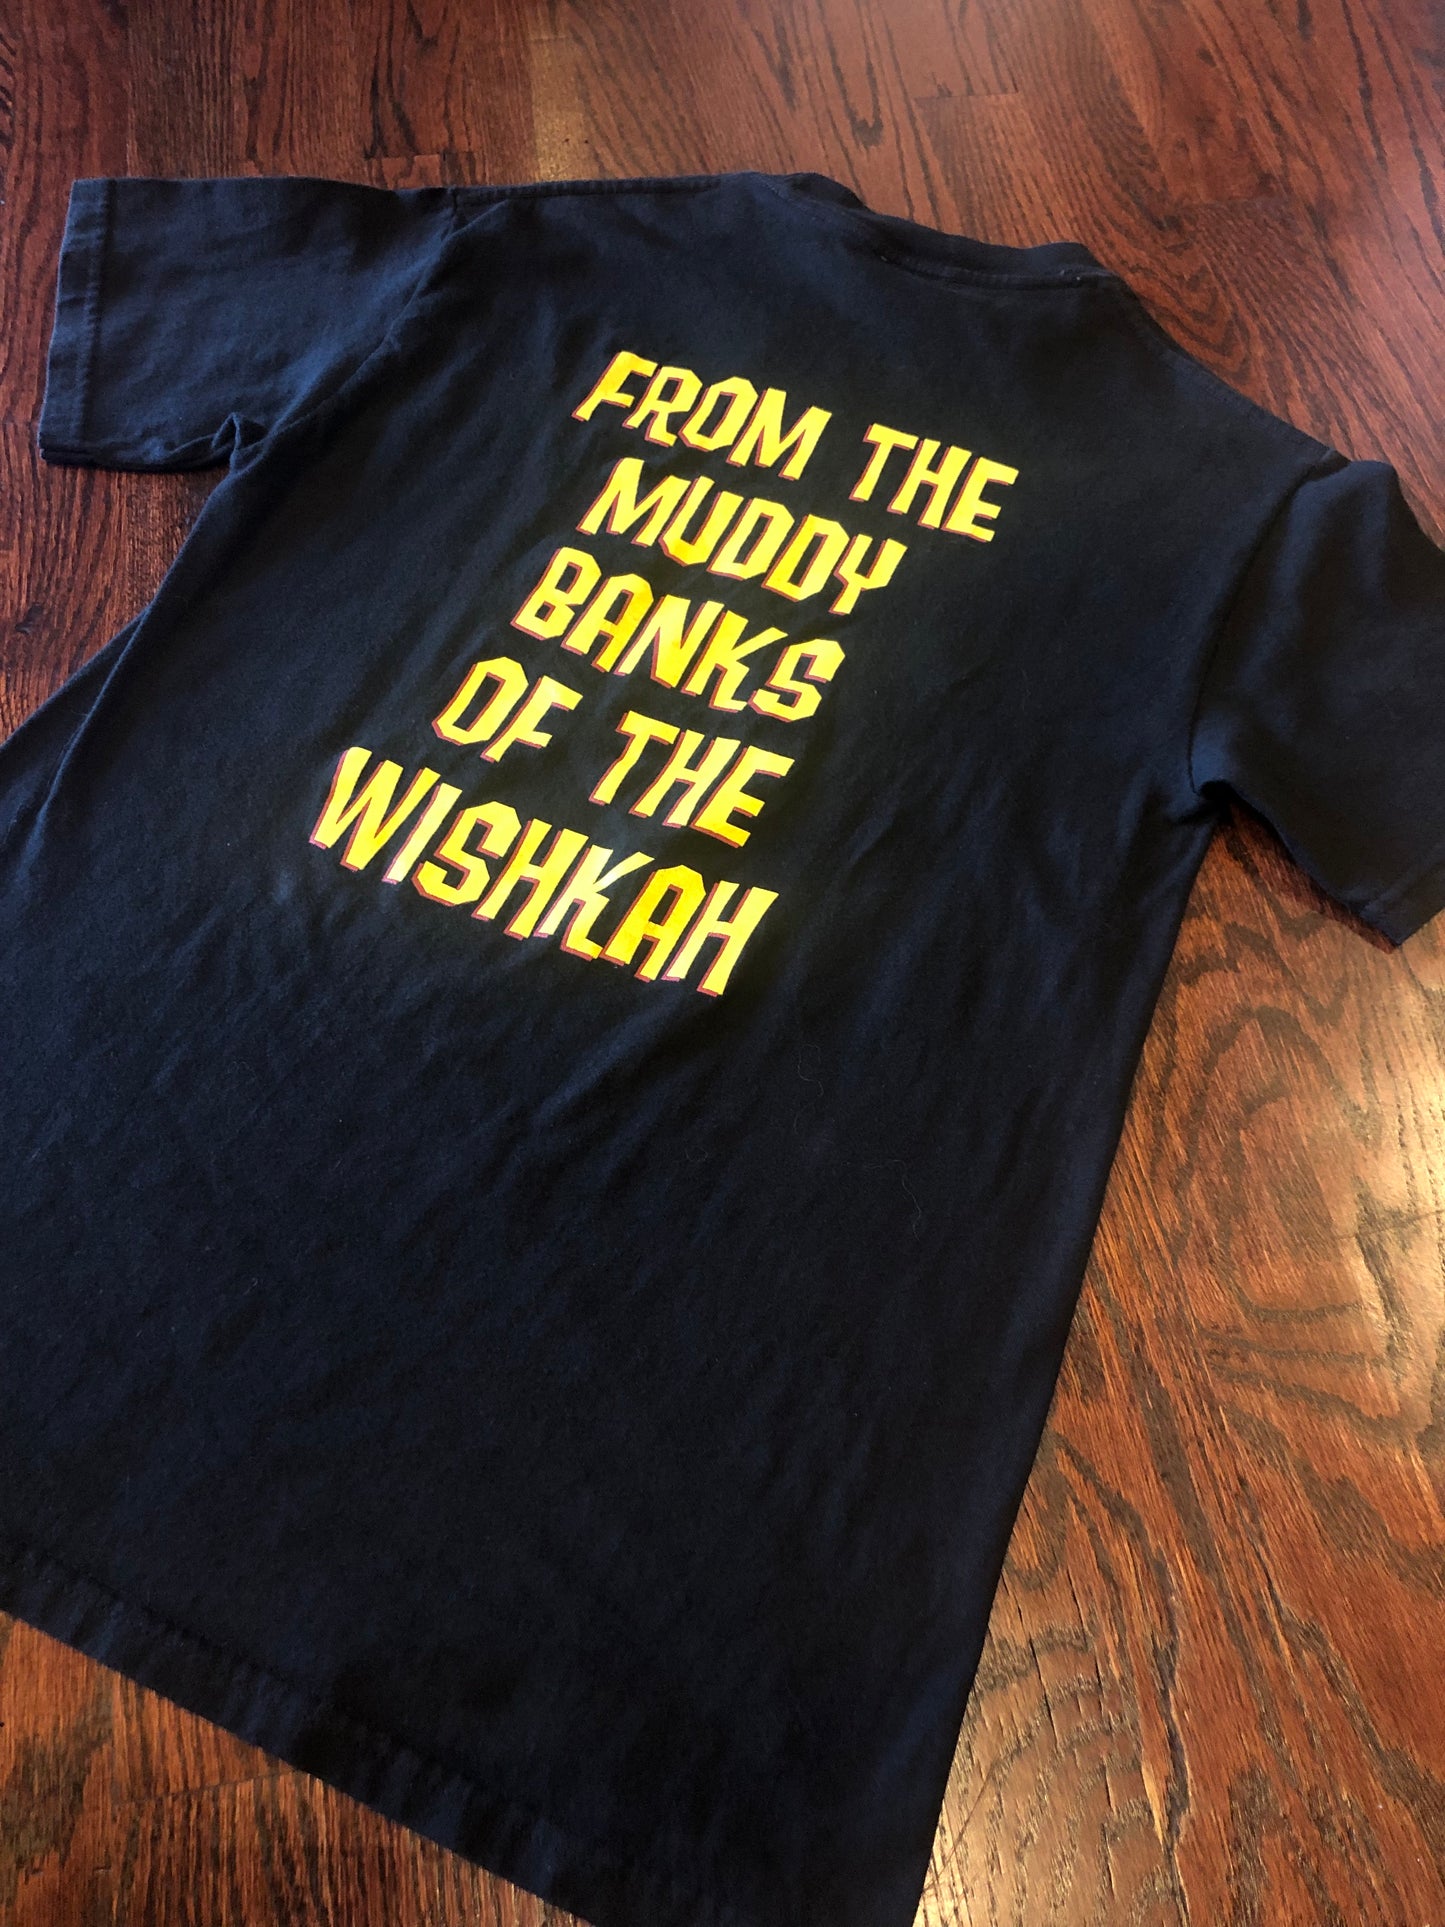 Vintage Nirvana “From the Muddy Banks of Wishkah” T-Shirt